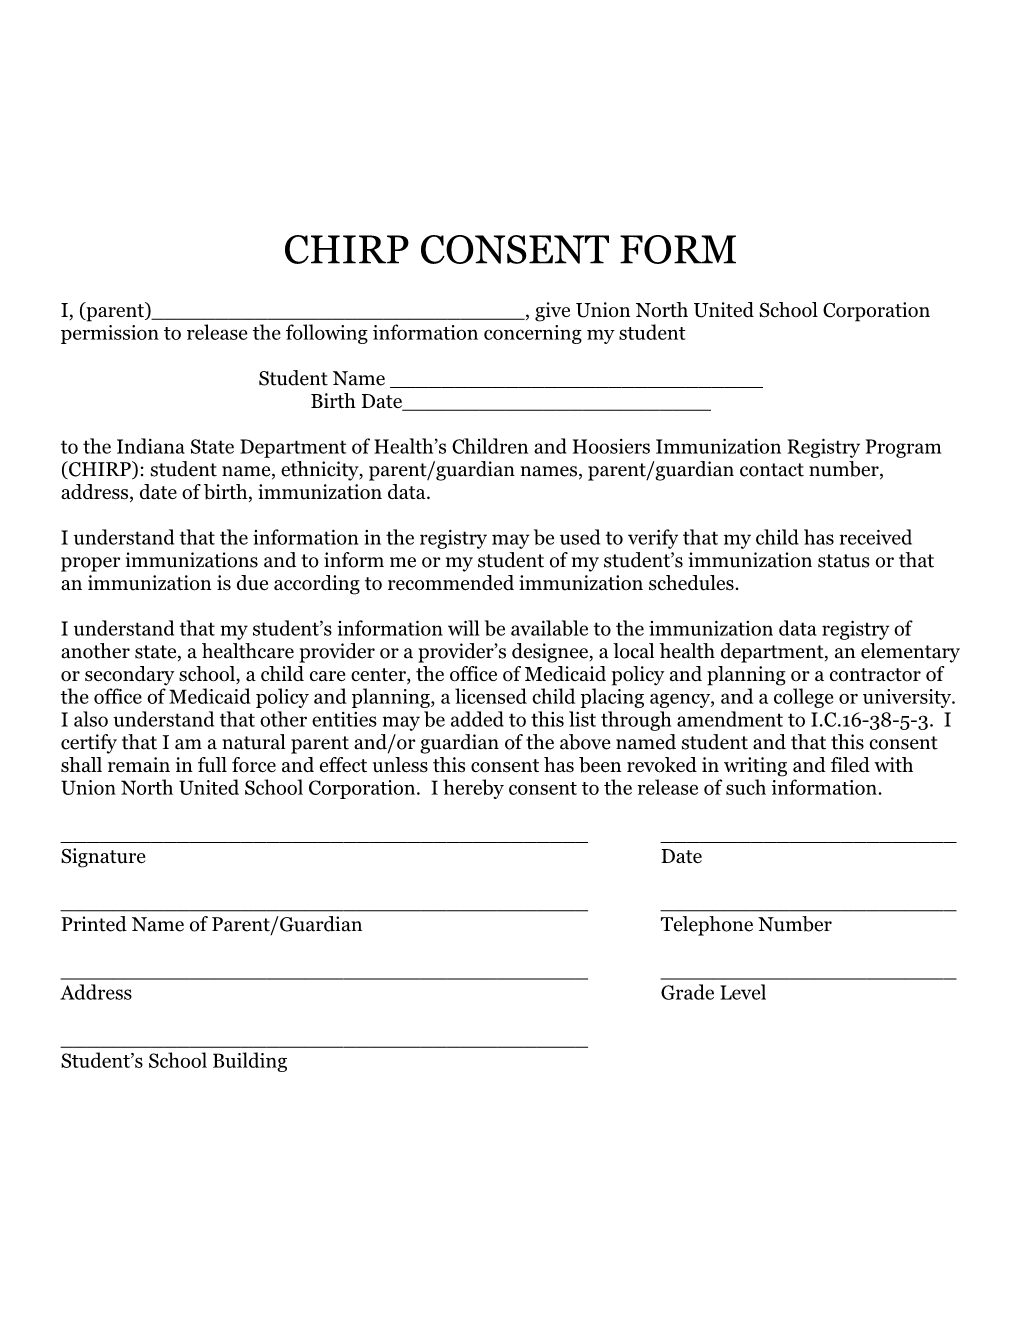 Chirp Consent Form